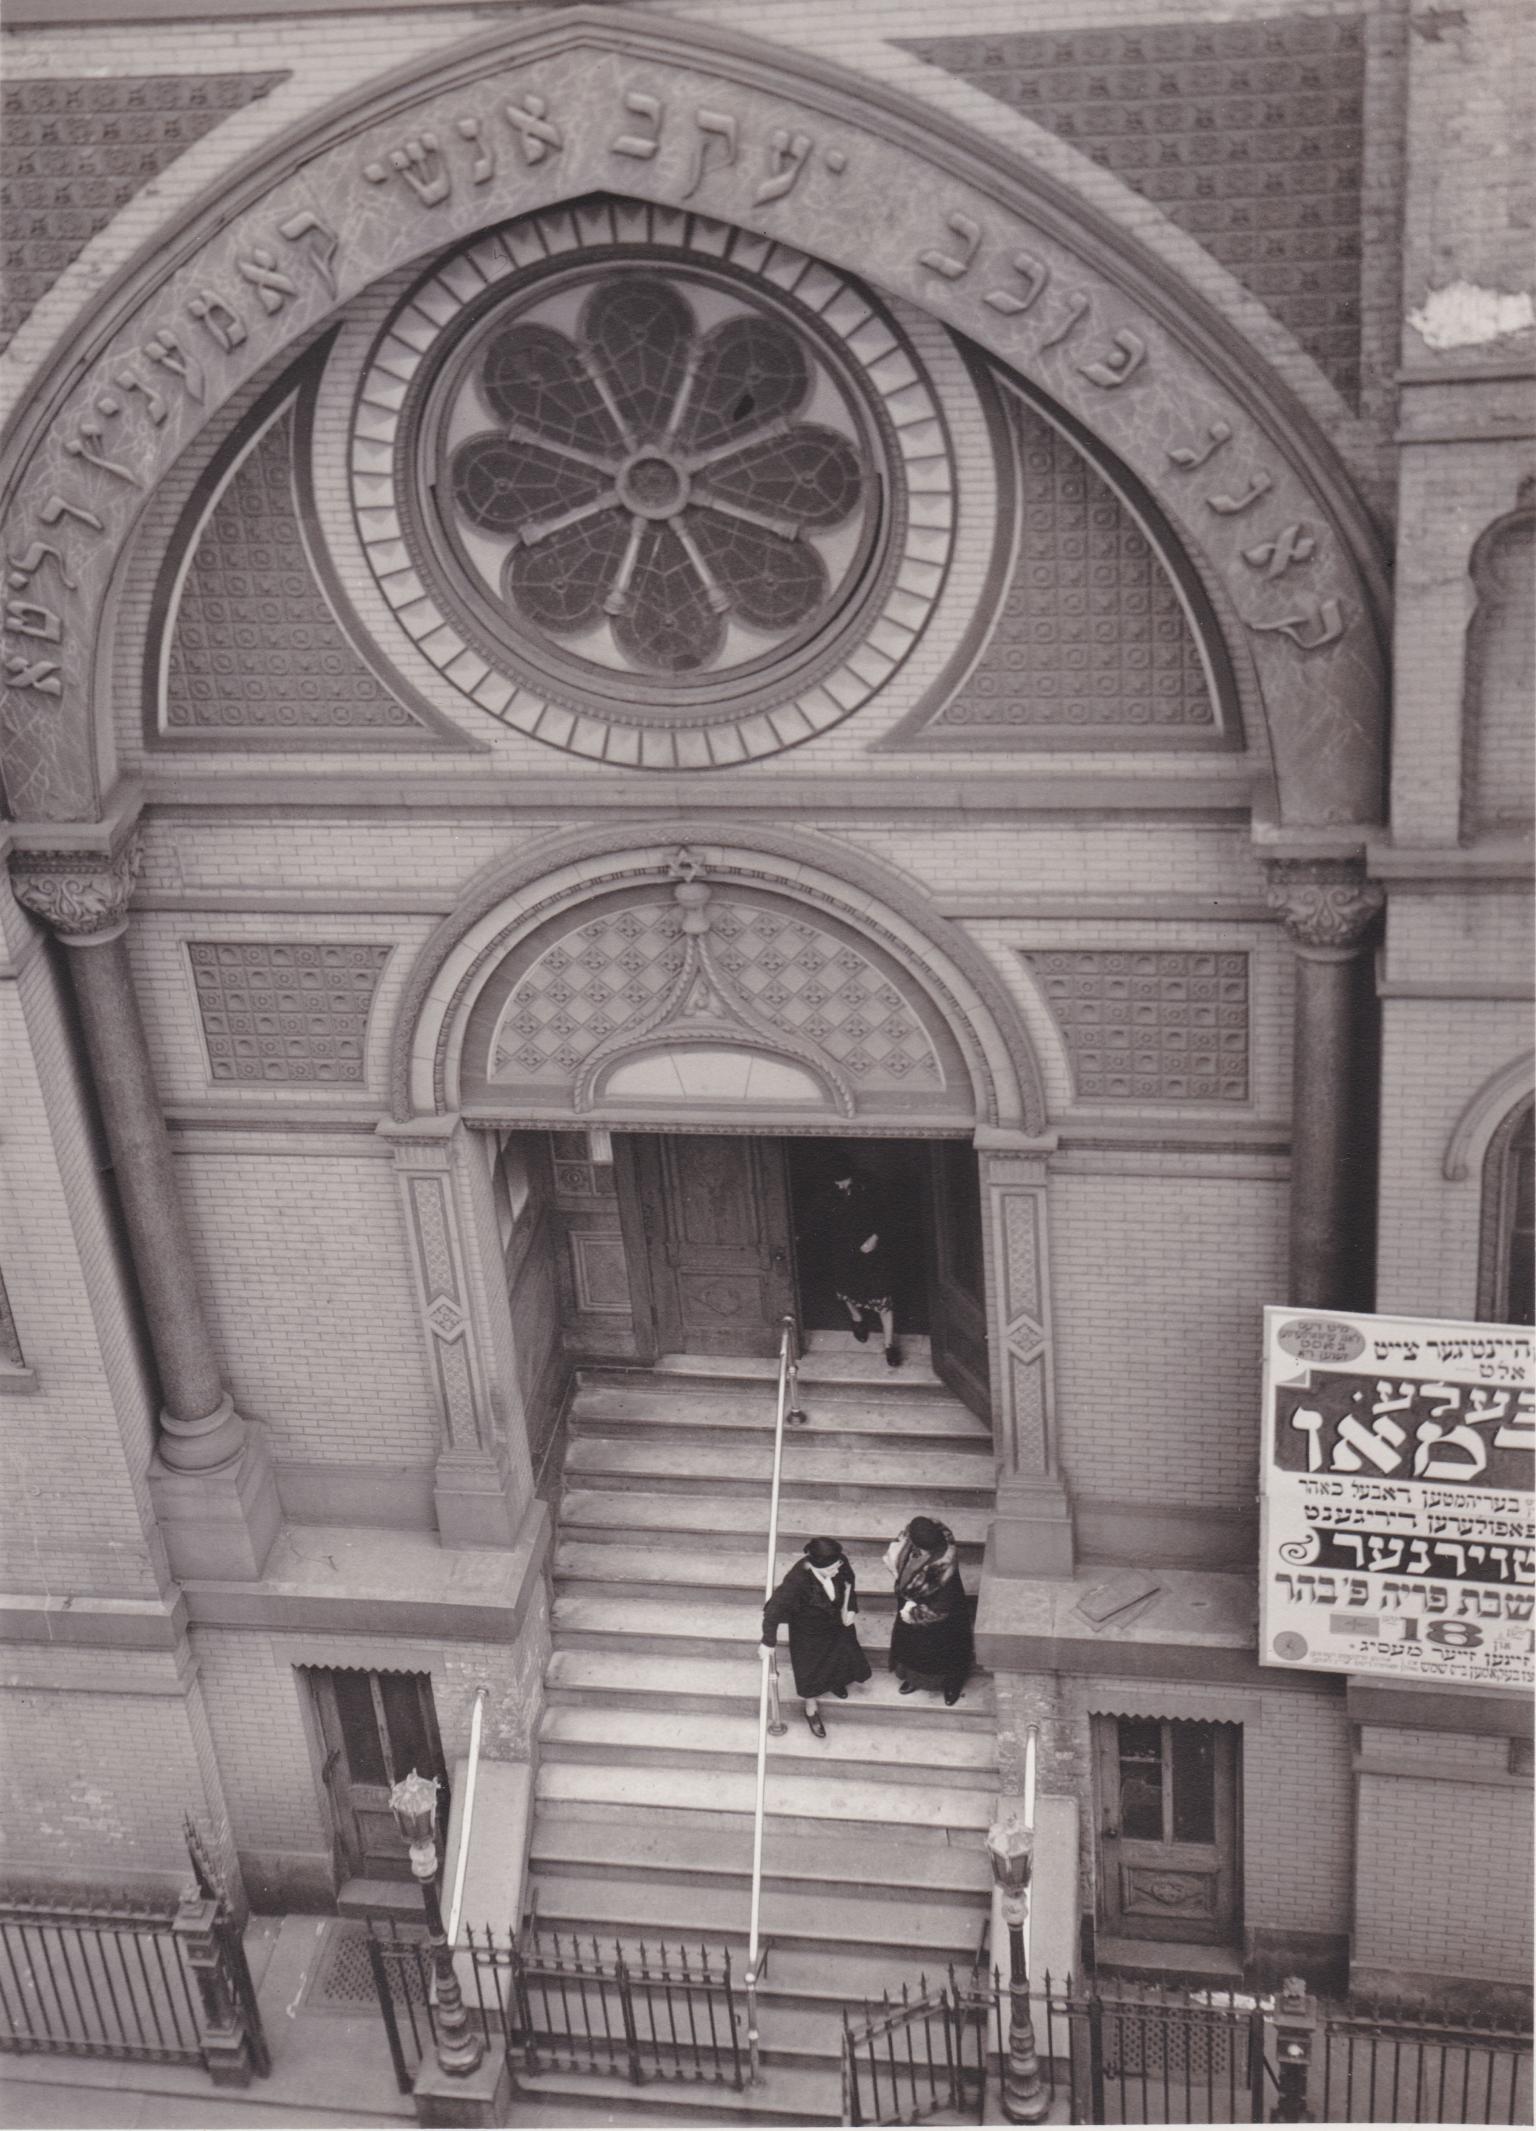 Photograph of building entrance with rose-shaped window and Hebrew inscription seen from above.